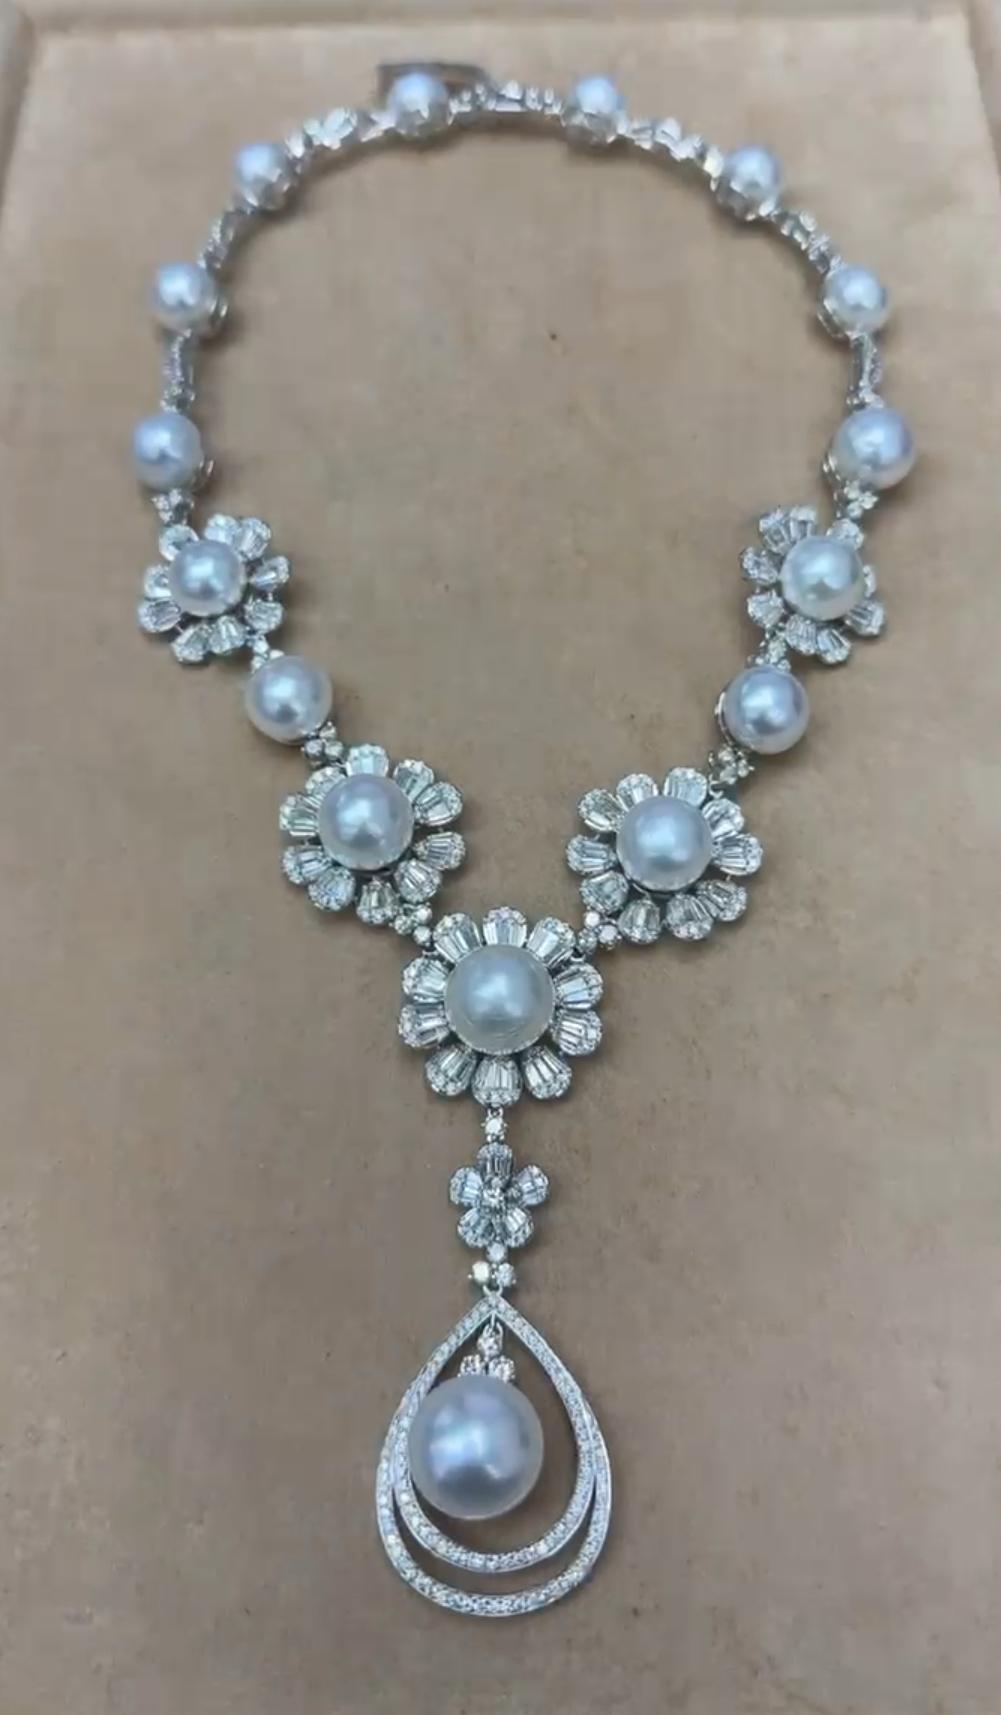 The Following Item we are offering is this Extremely Rare Beautiful 18KT Gold Fine Rare Large White South Sea Pearl Fancy Diamond Flowers Floral Necklace. This Magnificent Necklace is comprised of Rare Fine Large AA-AAA 13-14MM South Sea Pearls with